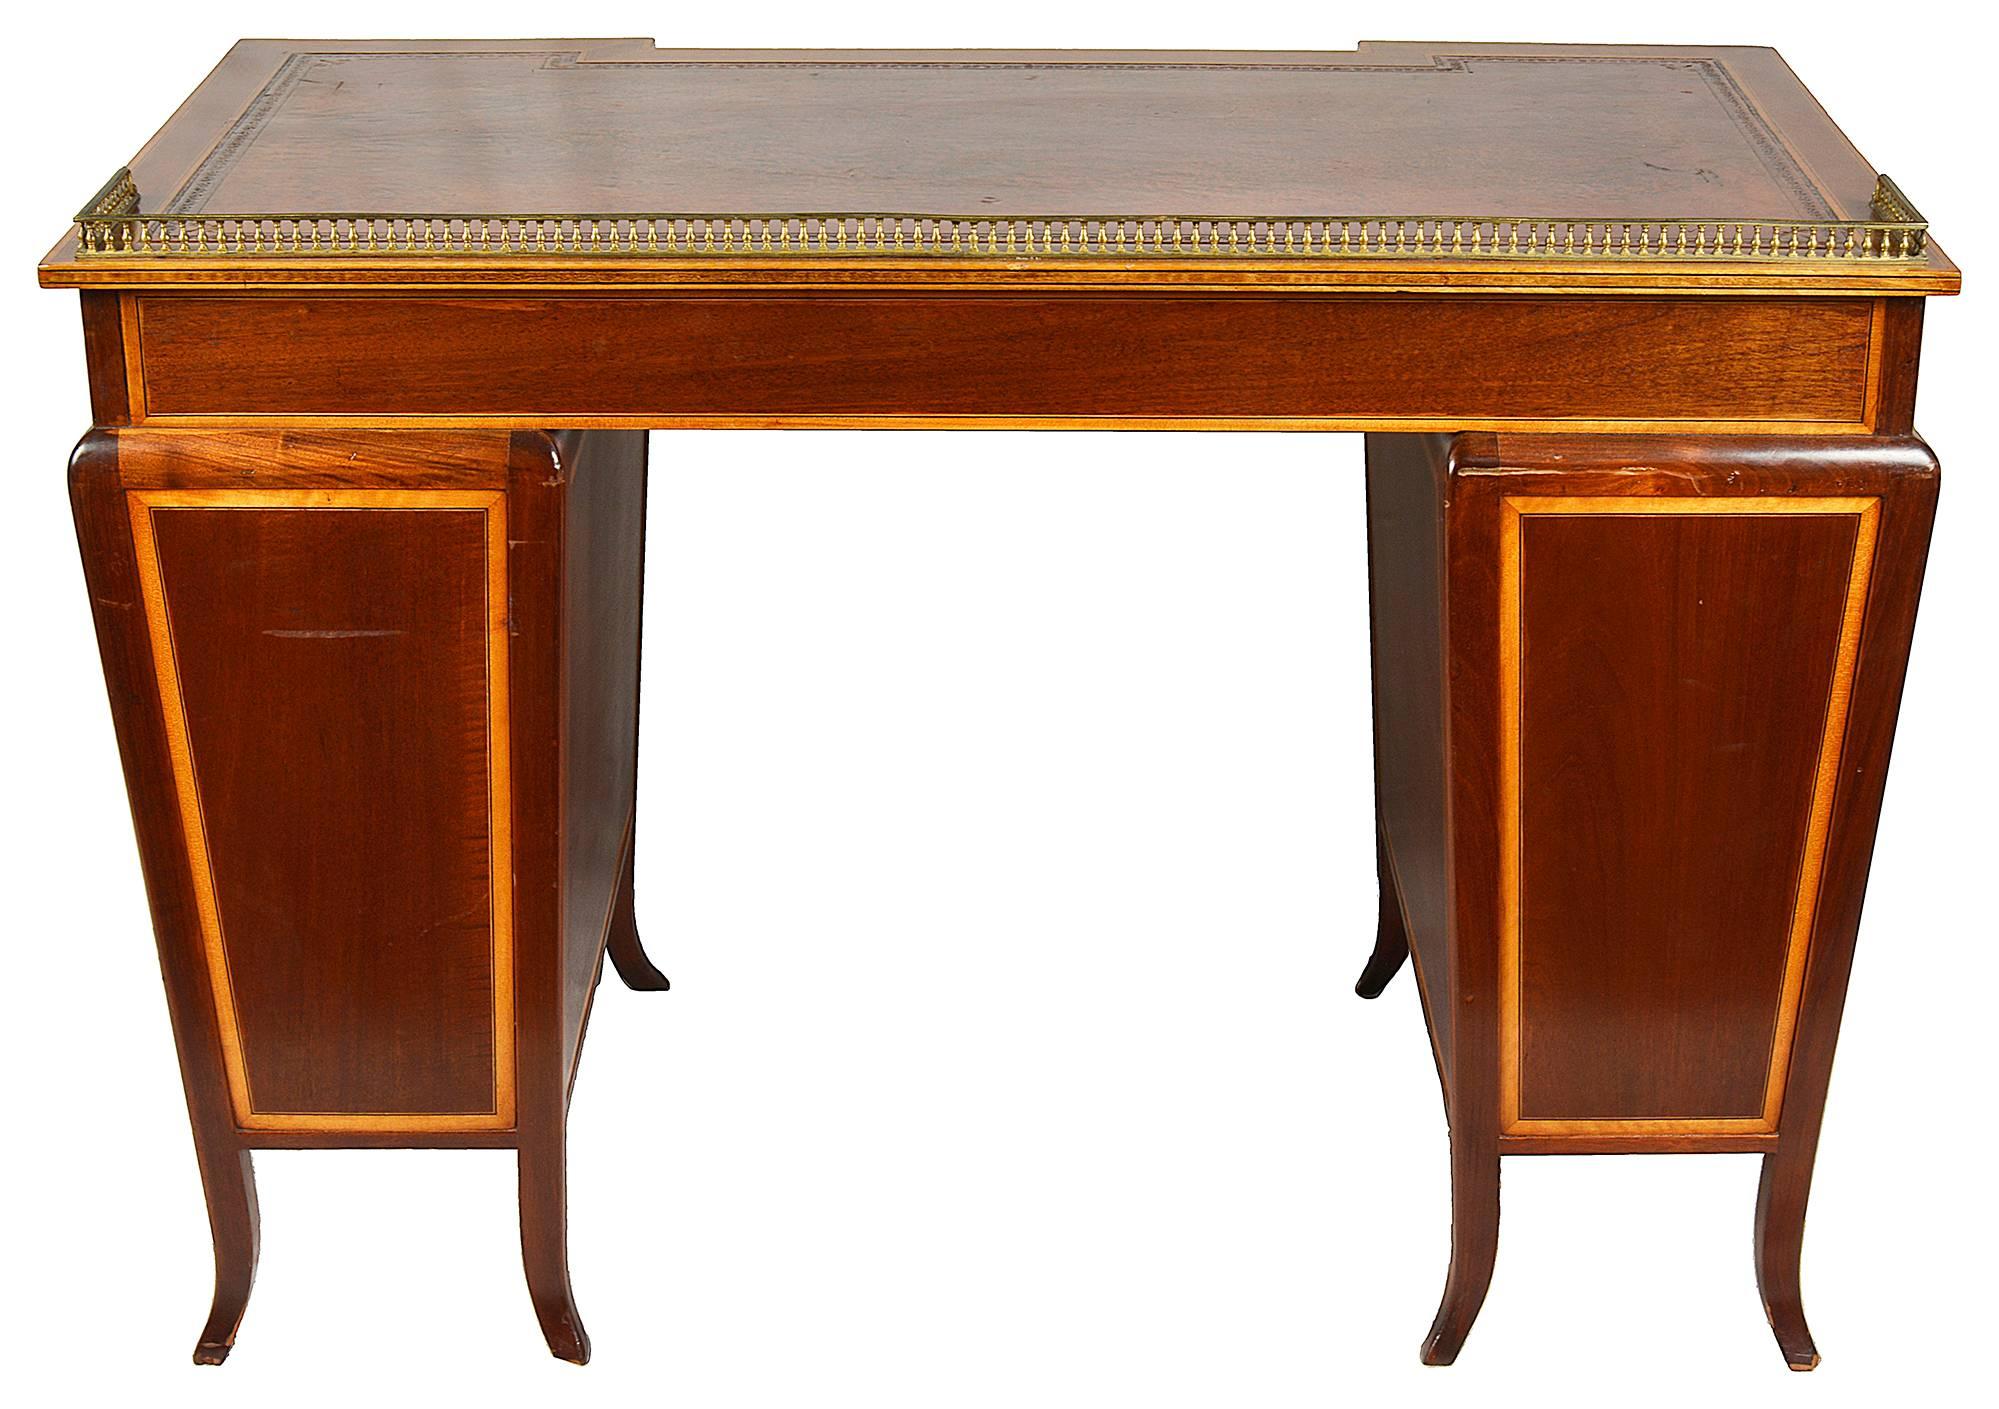 English Sheraton Revival Inlaid Desk, 19th Century, Edwards and Roberts For Sale